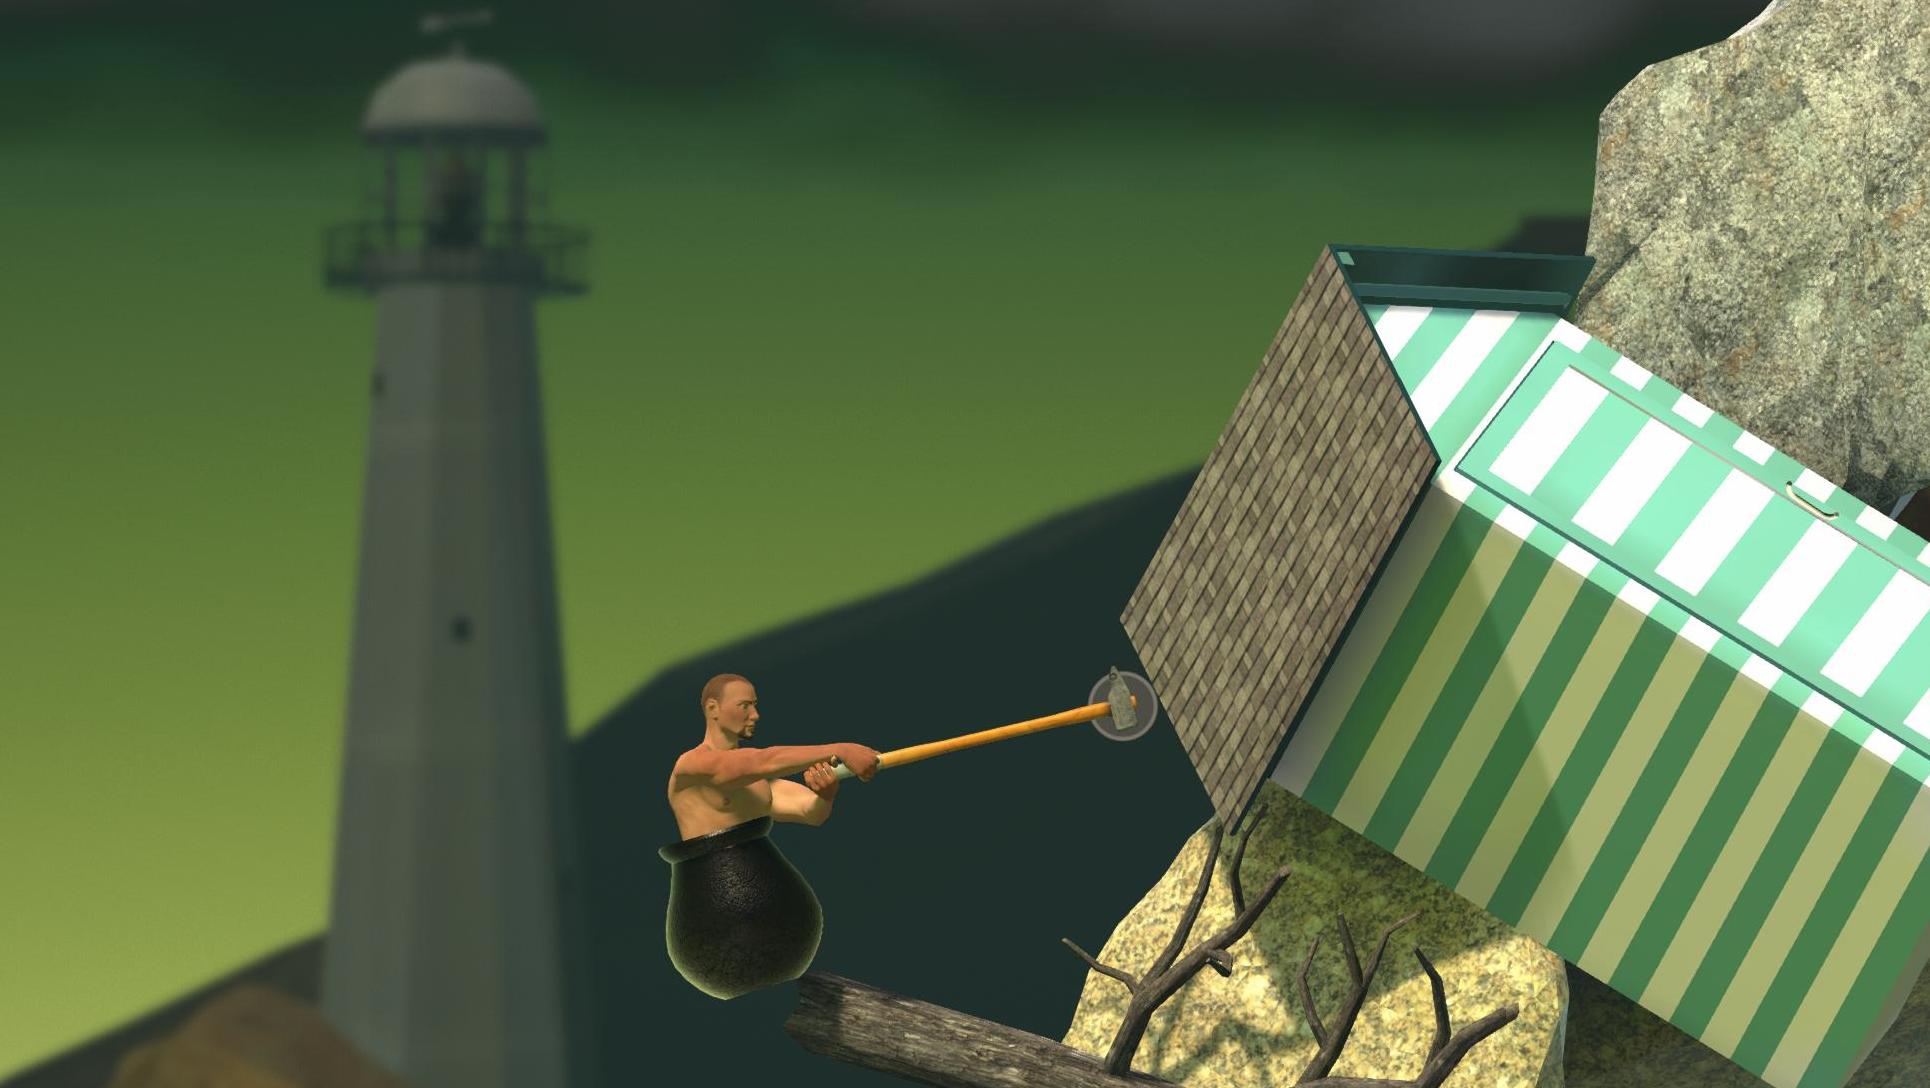 getting over it with bennett foddy key